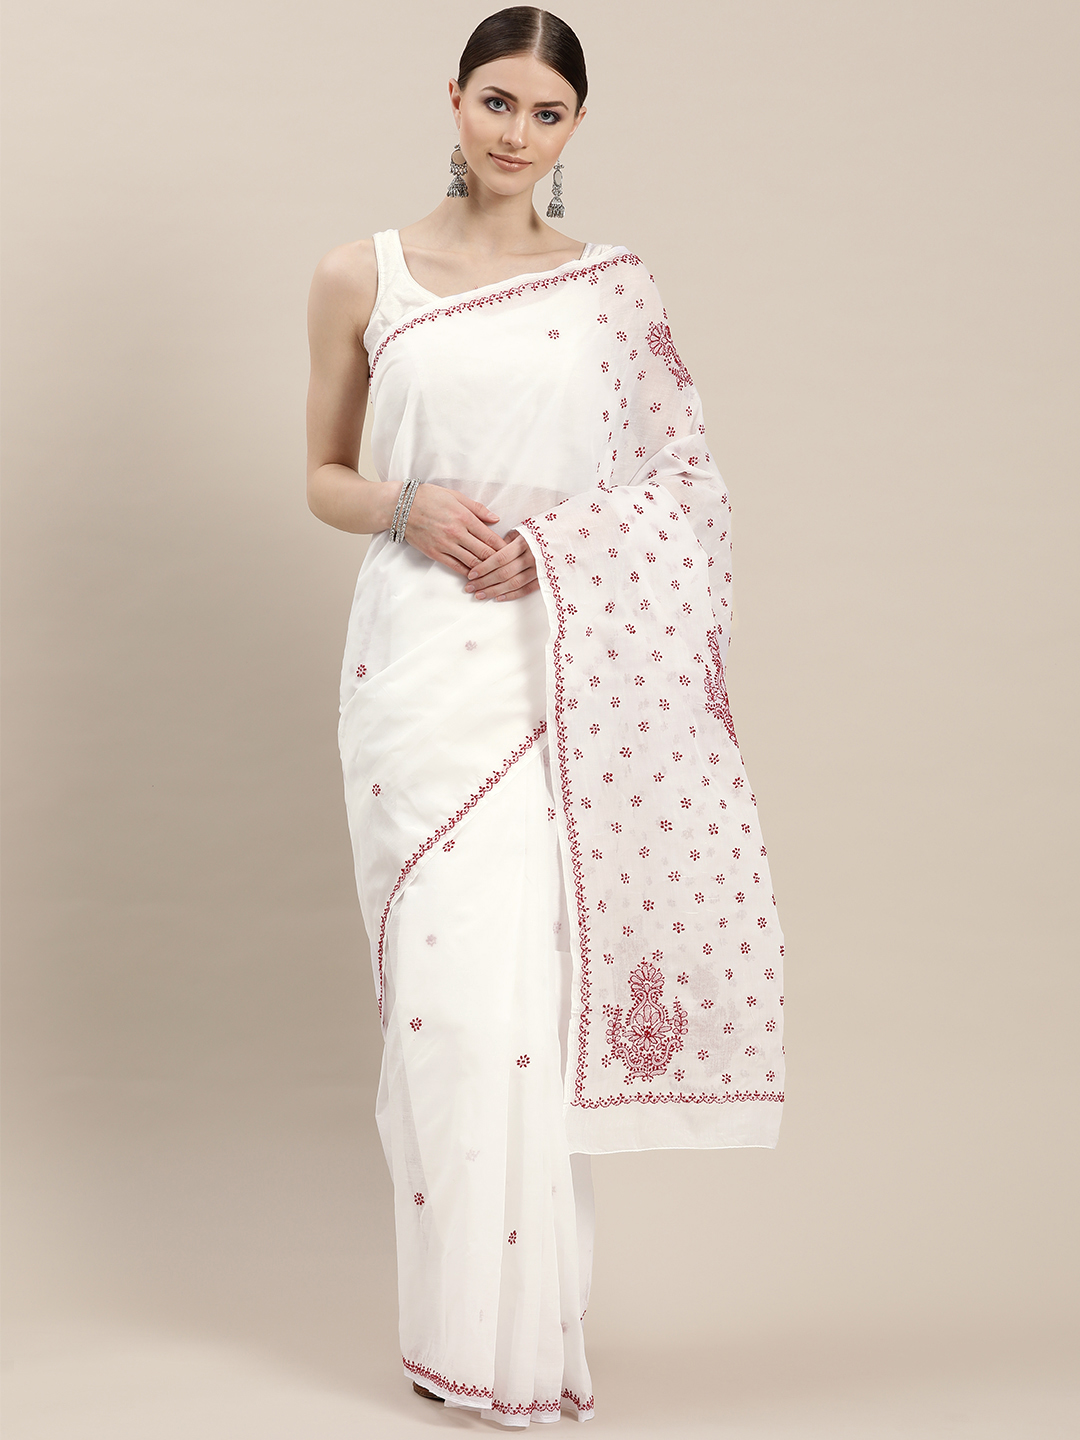 We added an elastic side seam to @nhnandini's white cotton saree